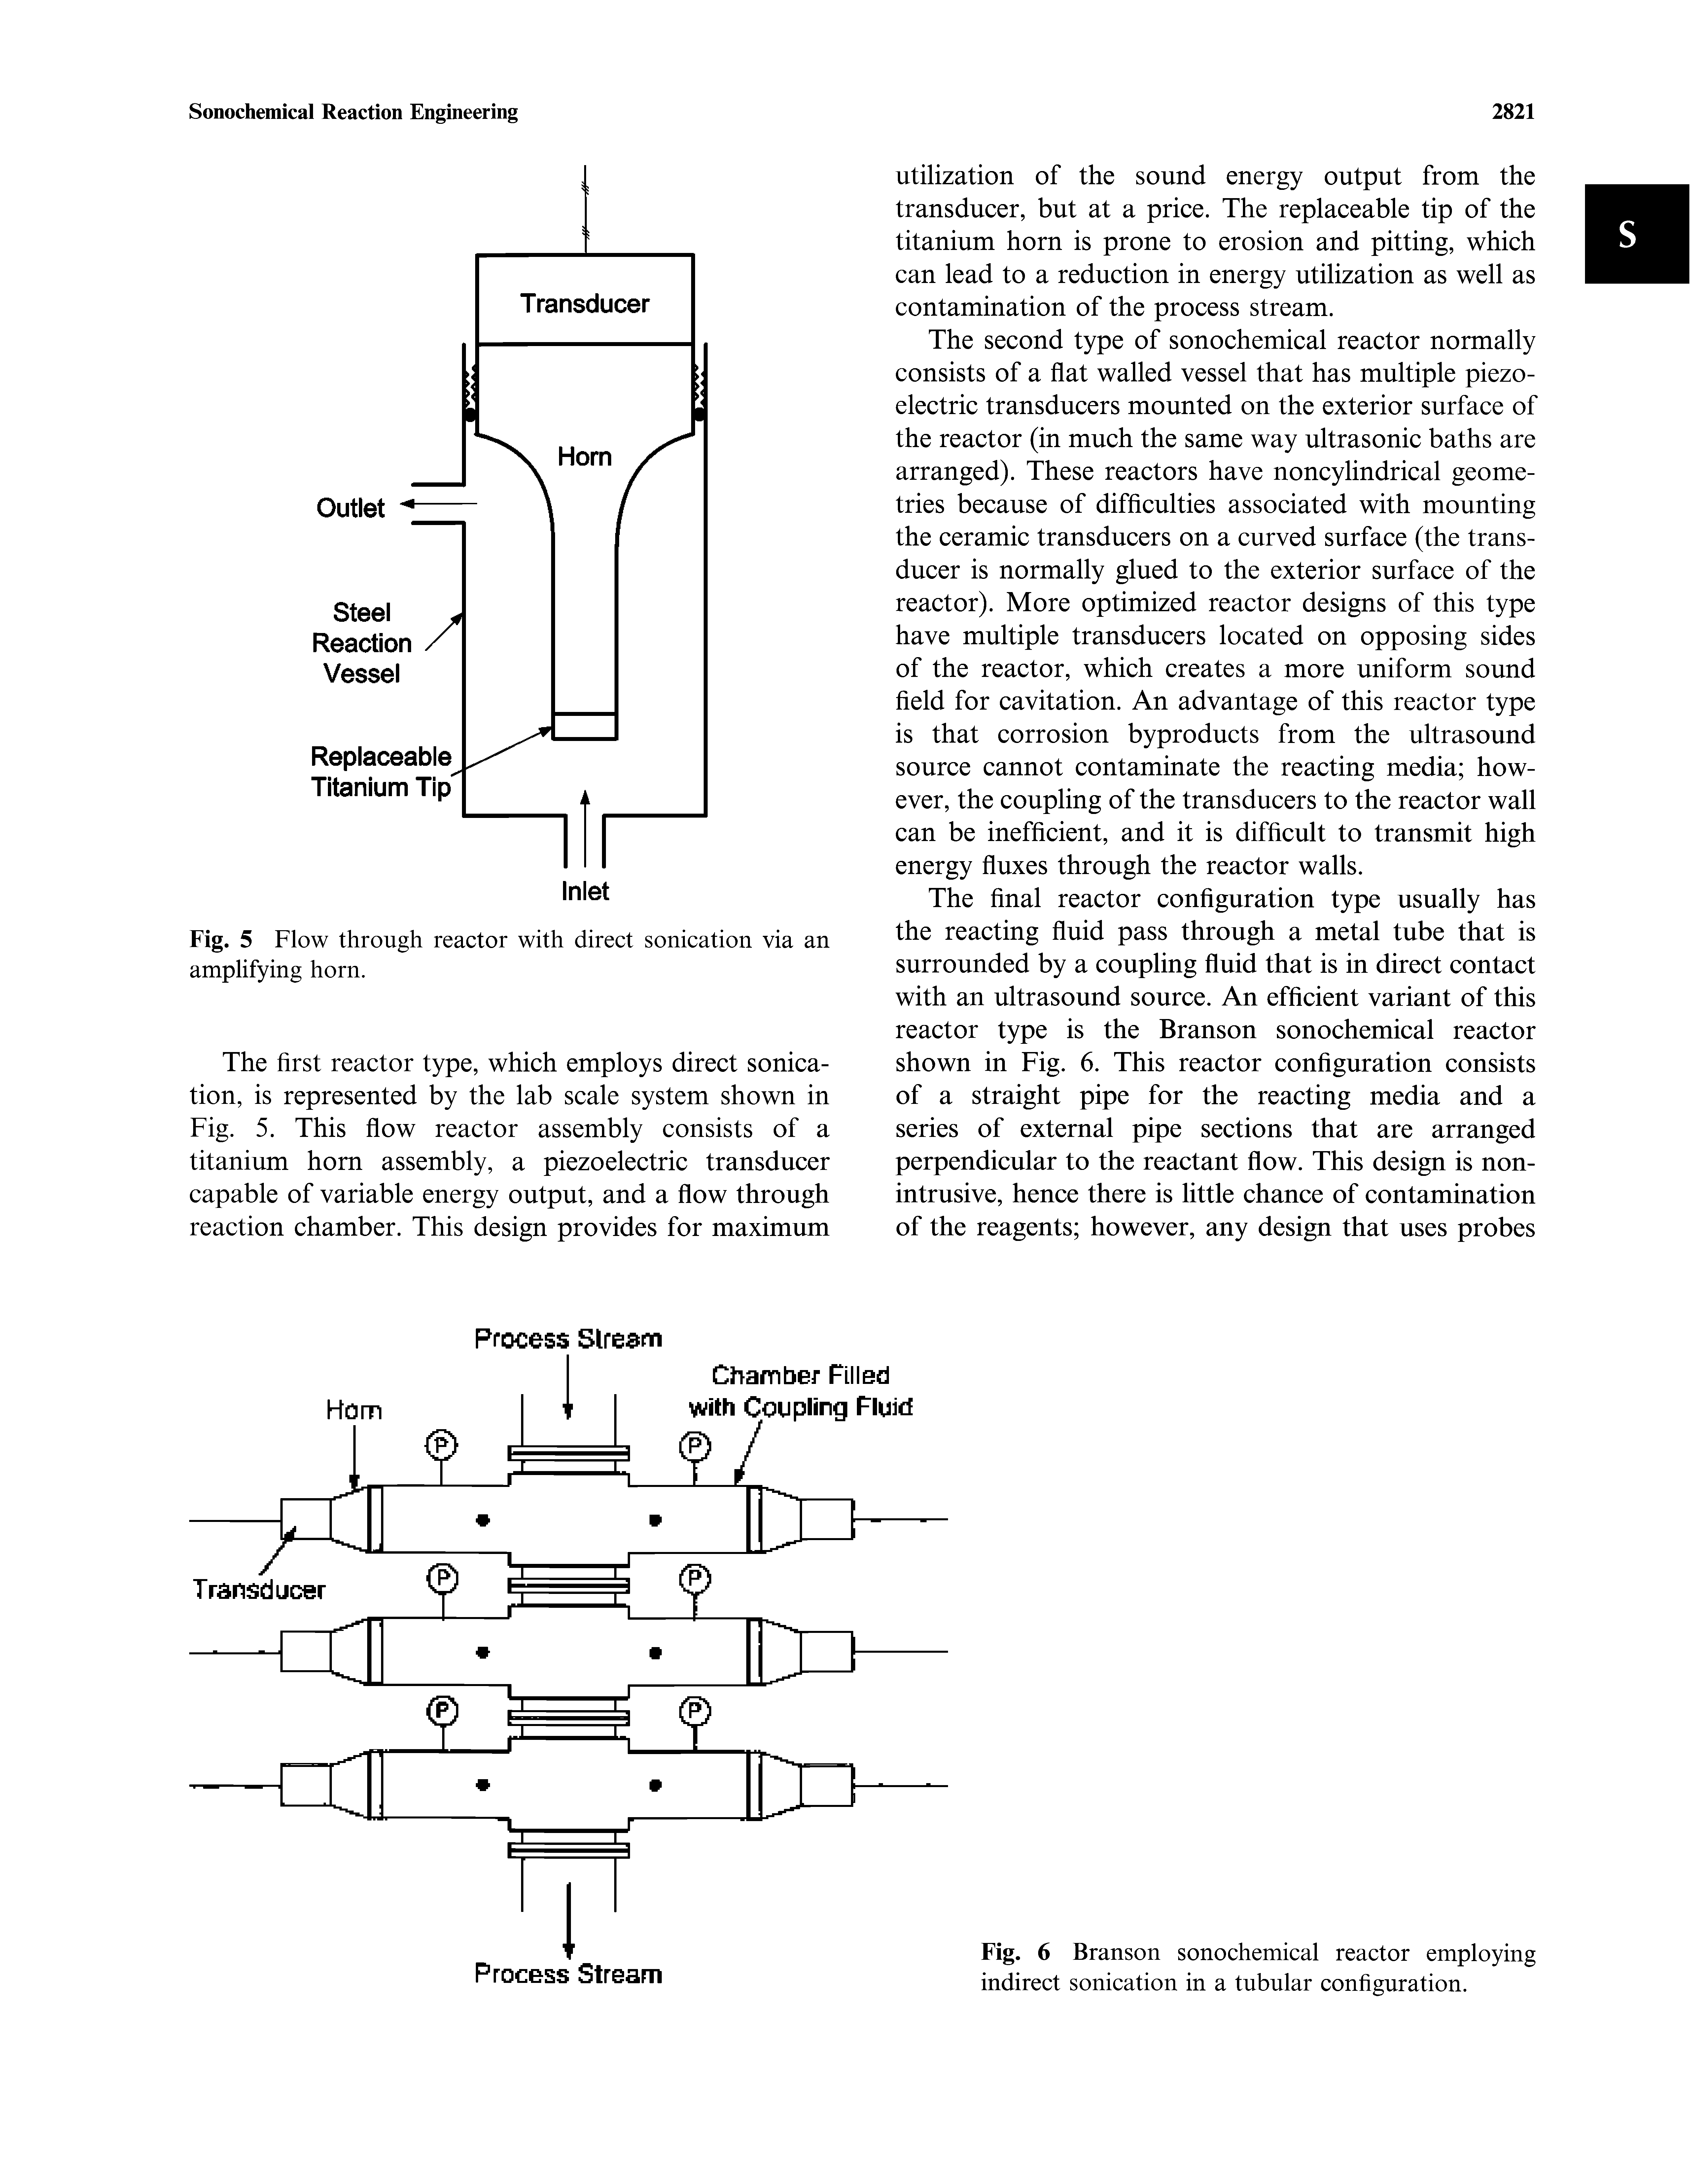 Fig. 5 Flow through reactor with direct sonication via an amplifying horn.